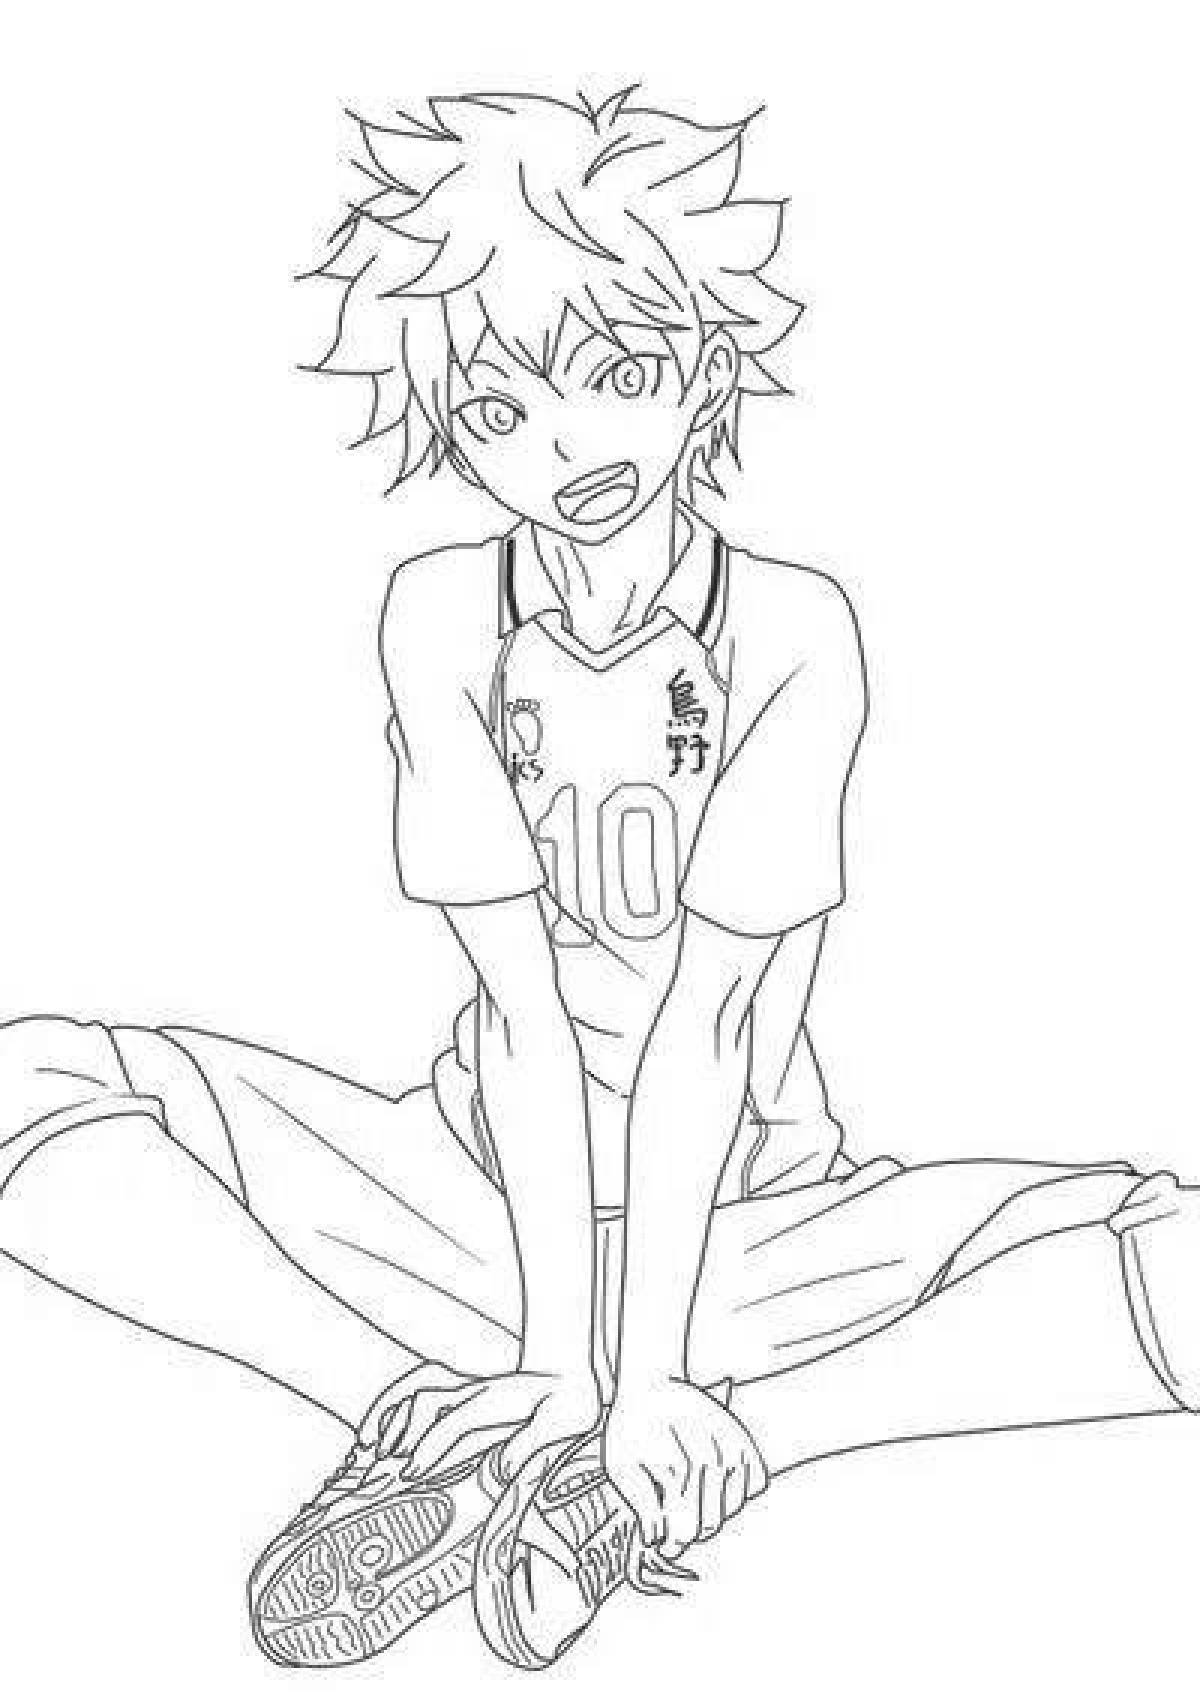 Hinata's gorgeous volleyball coloring book